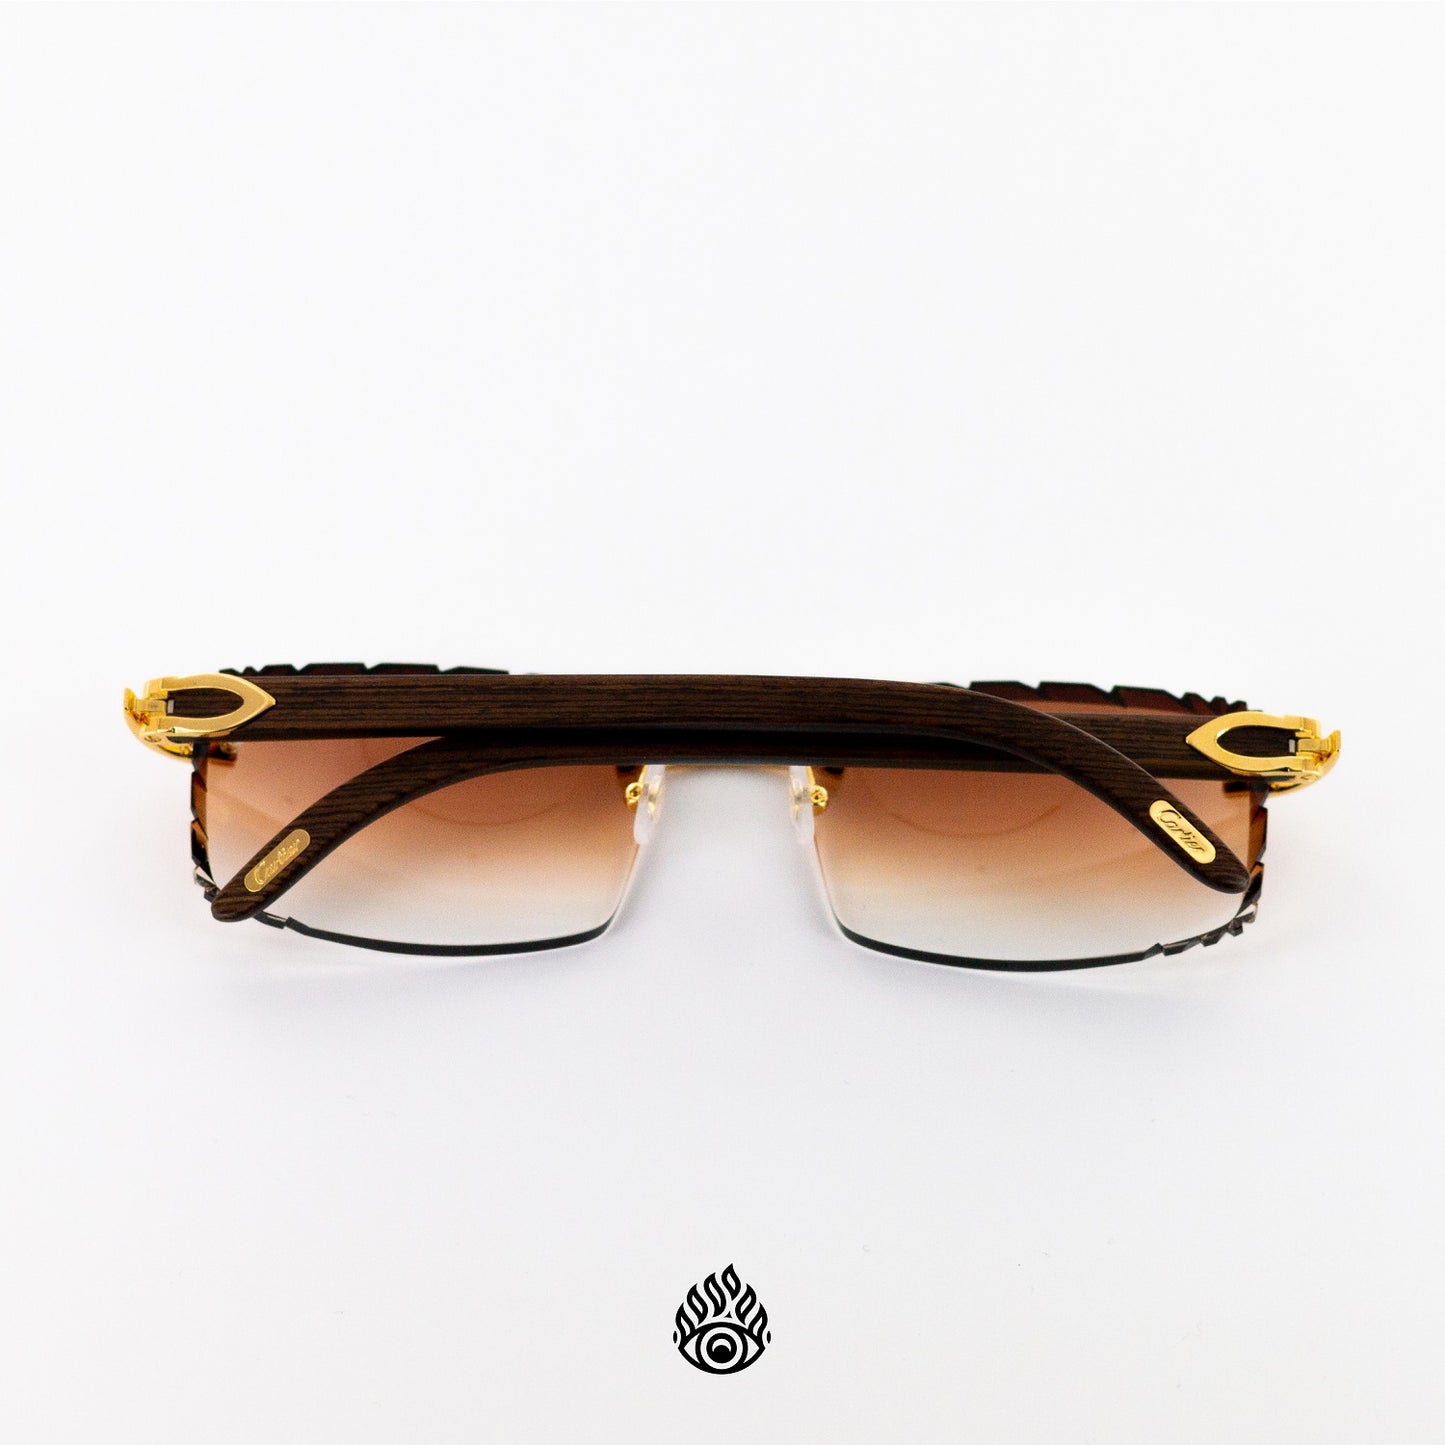 Cartier Dark Wood Glasses with Gold C Decor and Honey Brown Lens